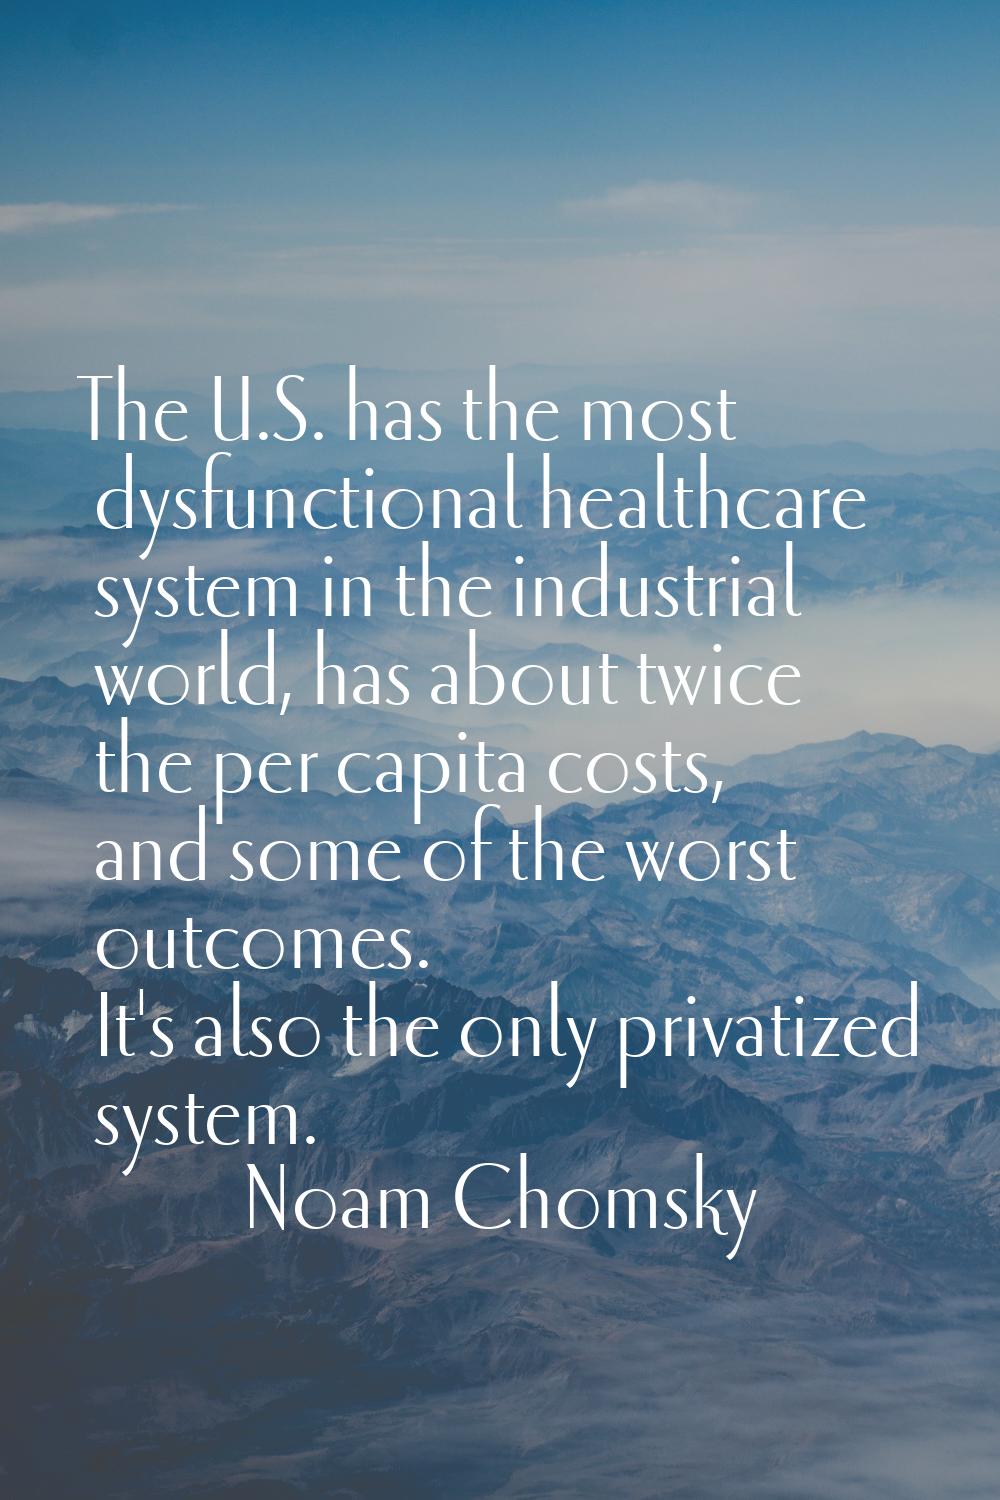 The U.S. has the most dysfunctional healthcare system in the industrial world, has about twice the 